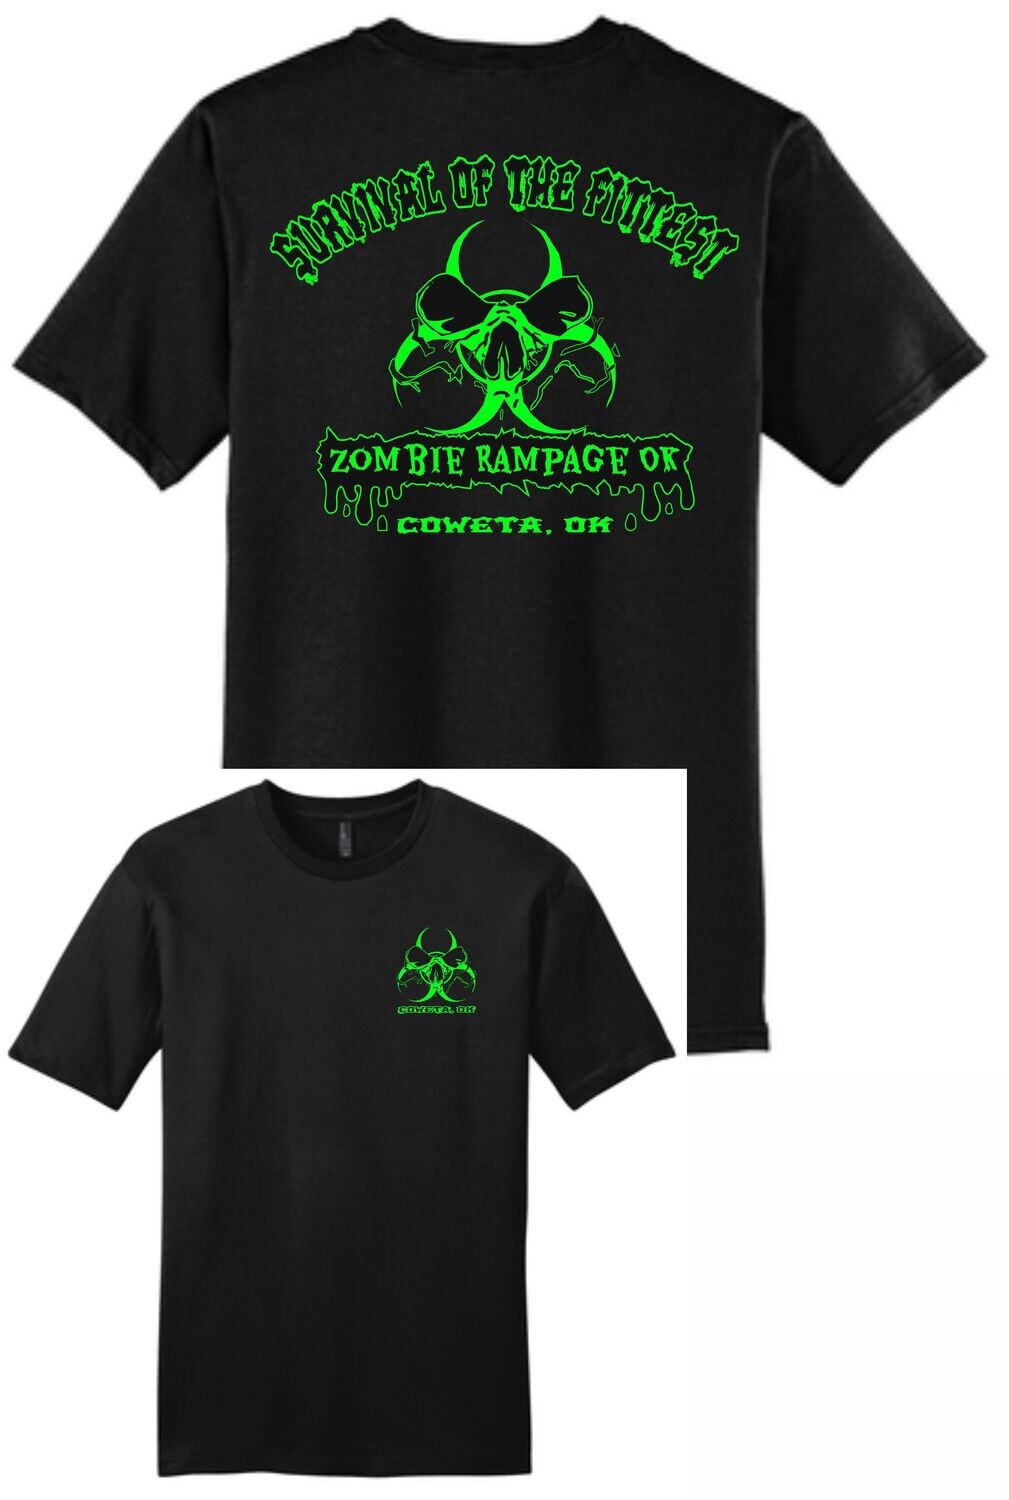 ZOMBIE RAMPAGE ~
DT6000 - District ® Very Important TEE ®